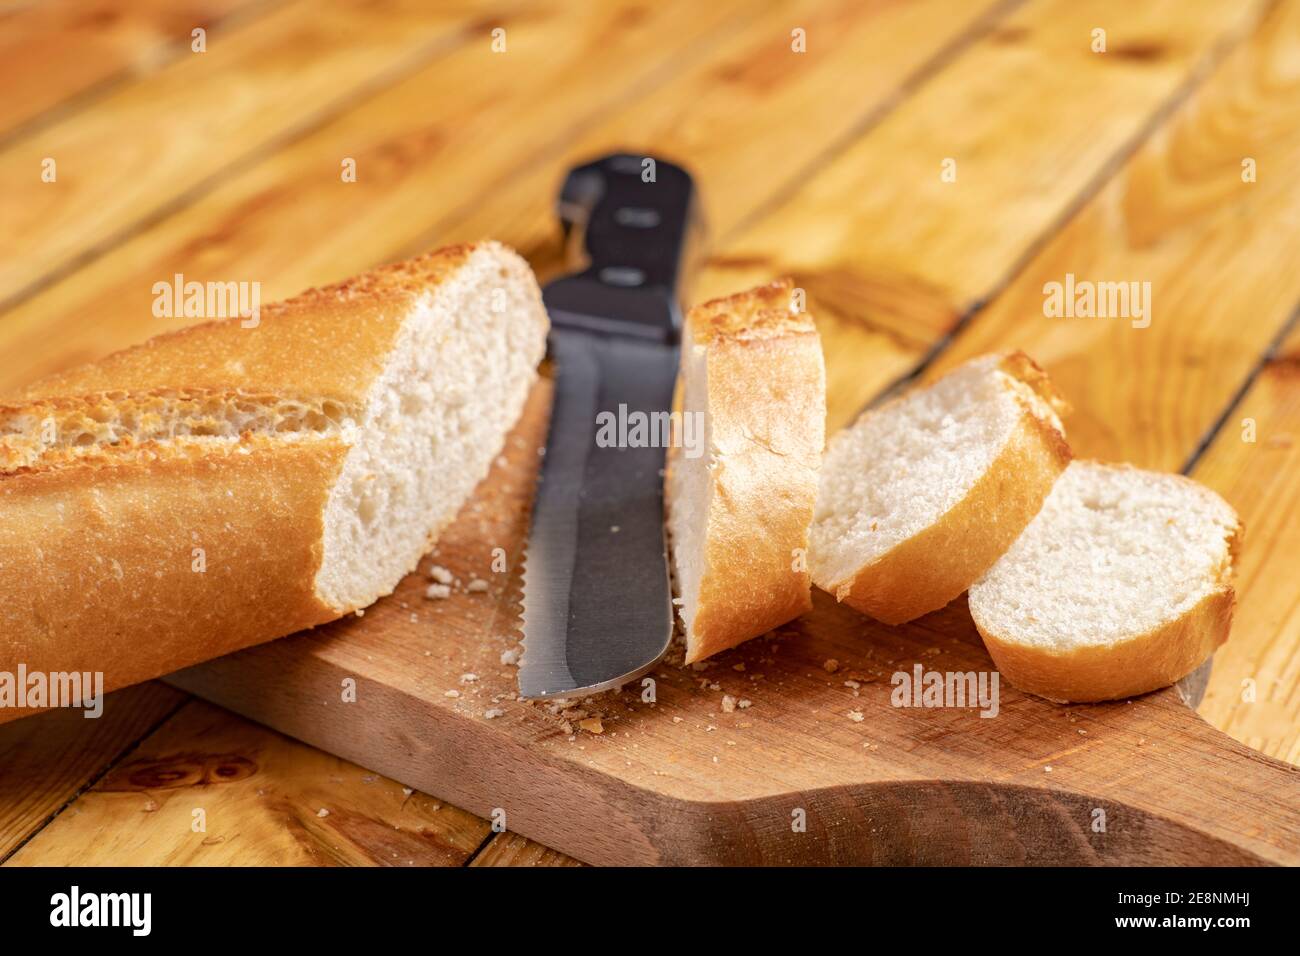 Tasty and fresh baguette cut into pieces. Bread and a chopping knife in the home kitchen. Light background. Stock Photo